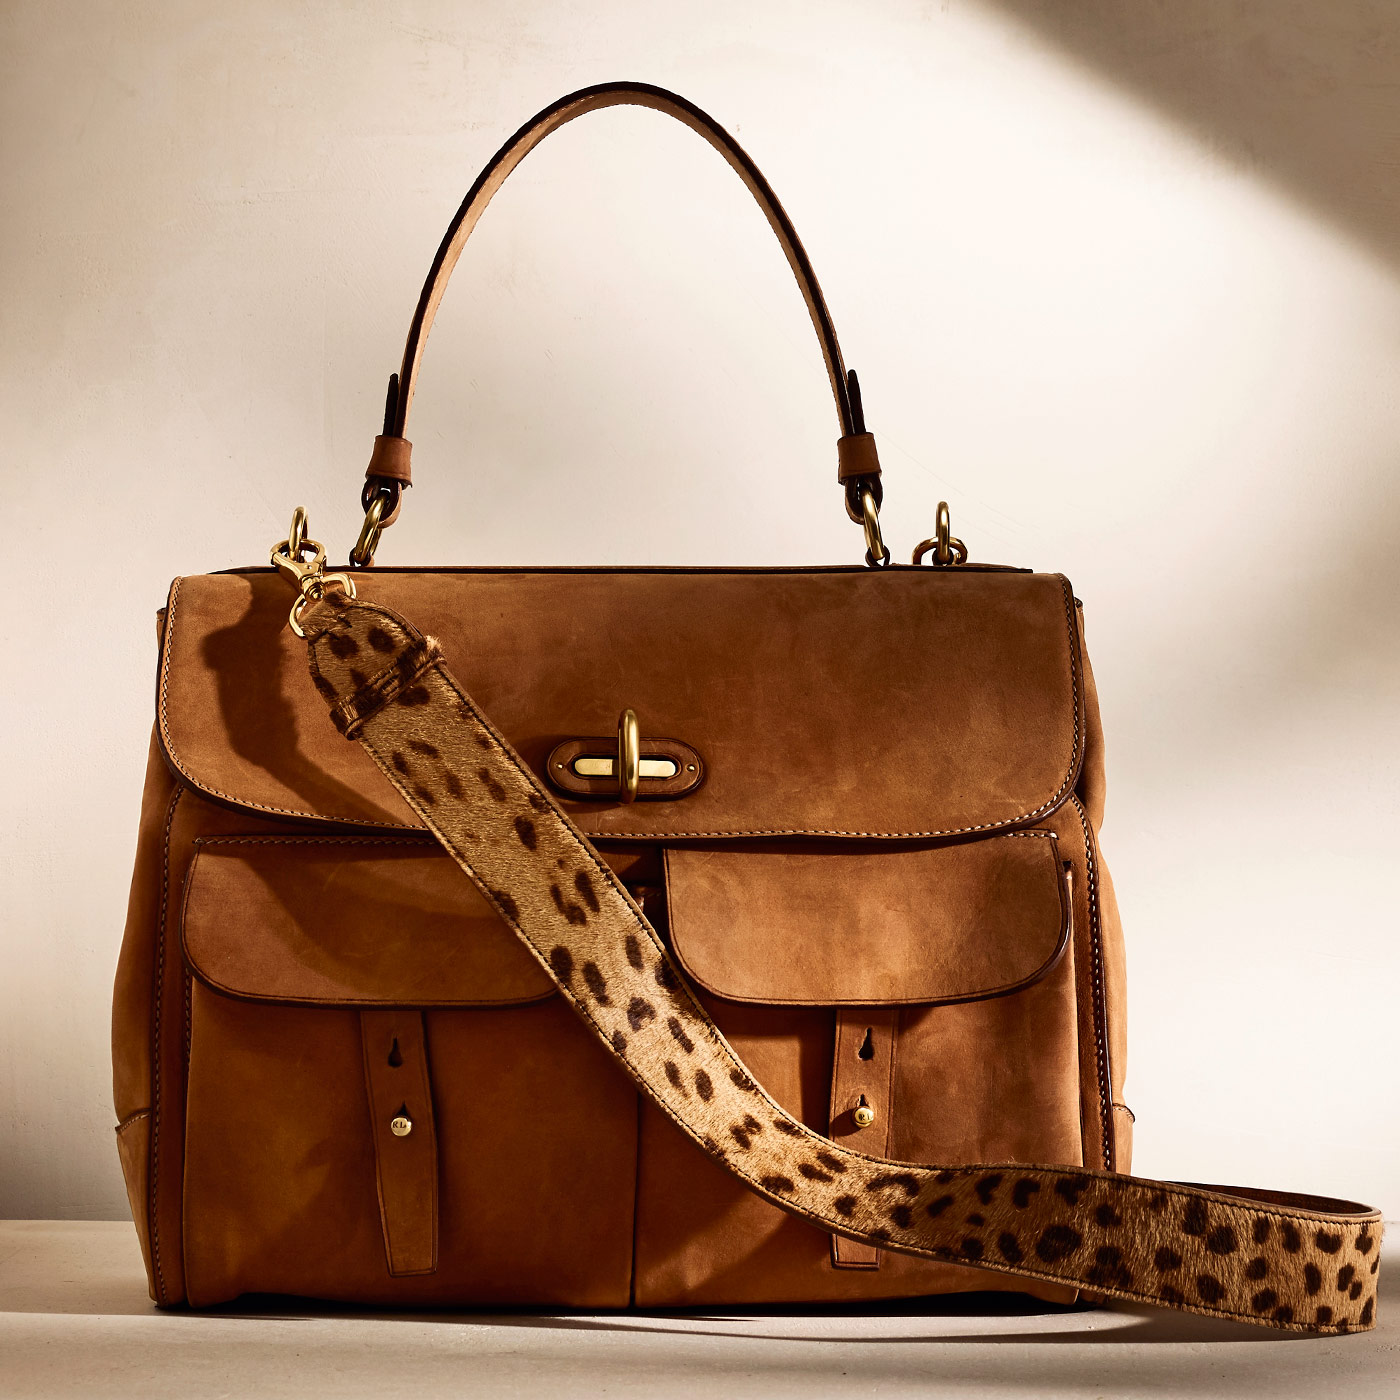     <p><span>Crafted from natural calfskin, the Tiffin is vegetable-tanned and buffed by skilled artisans to achieve the velvety texture of suede</span></p>  